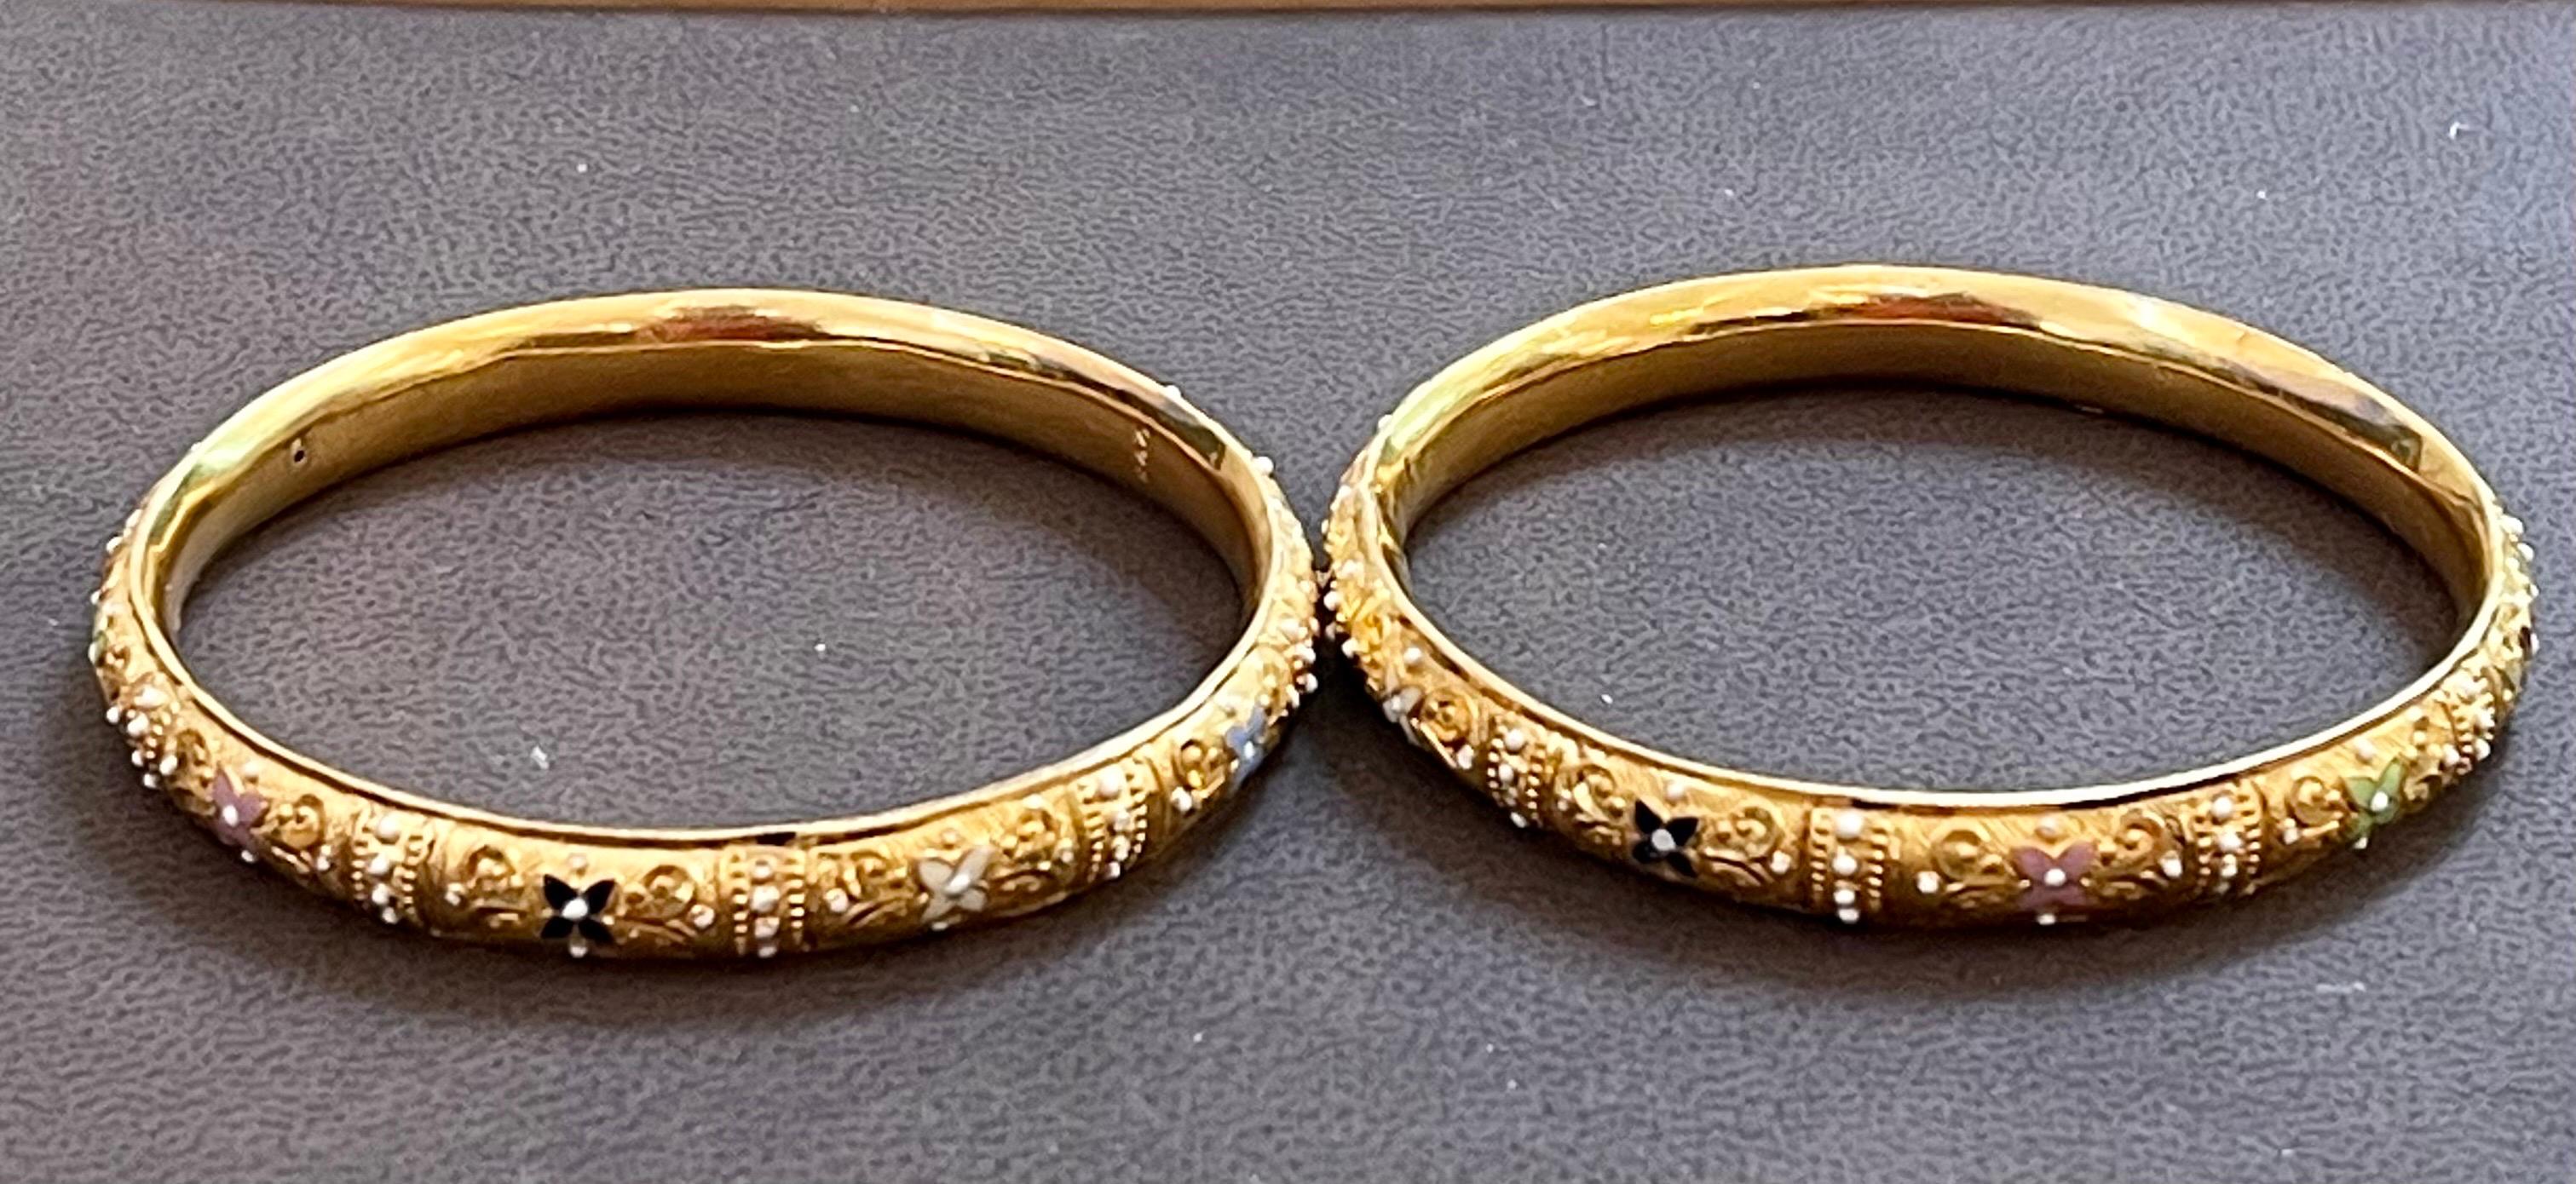 pre owned 22ct gold bangles